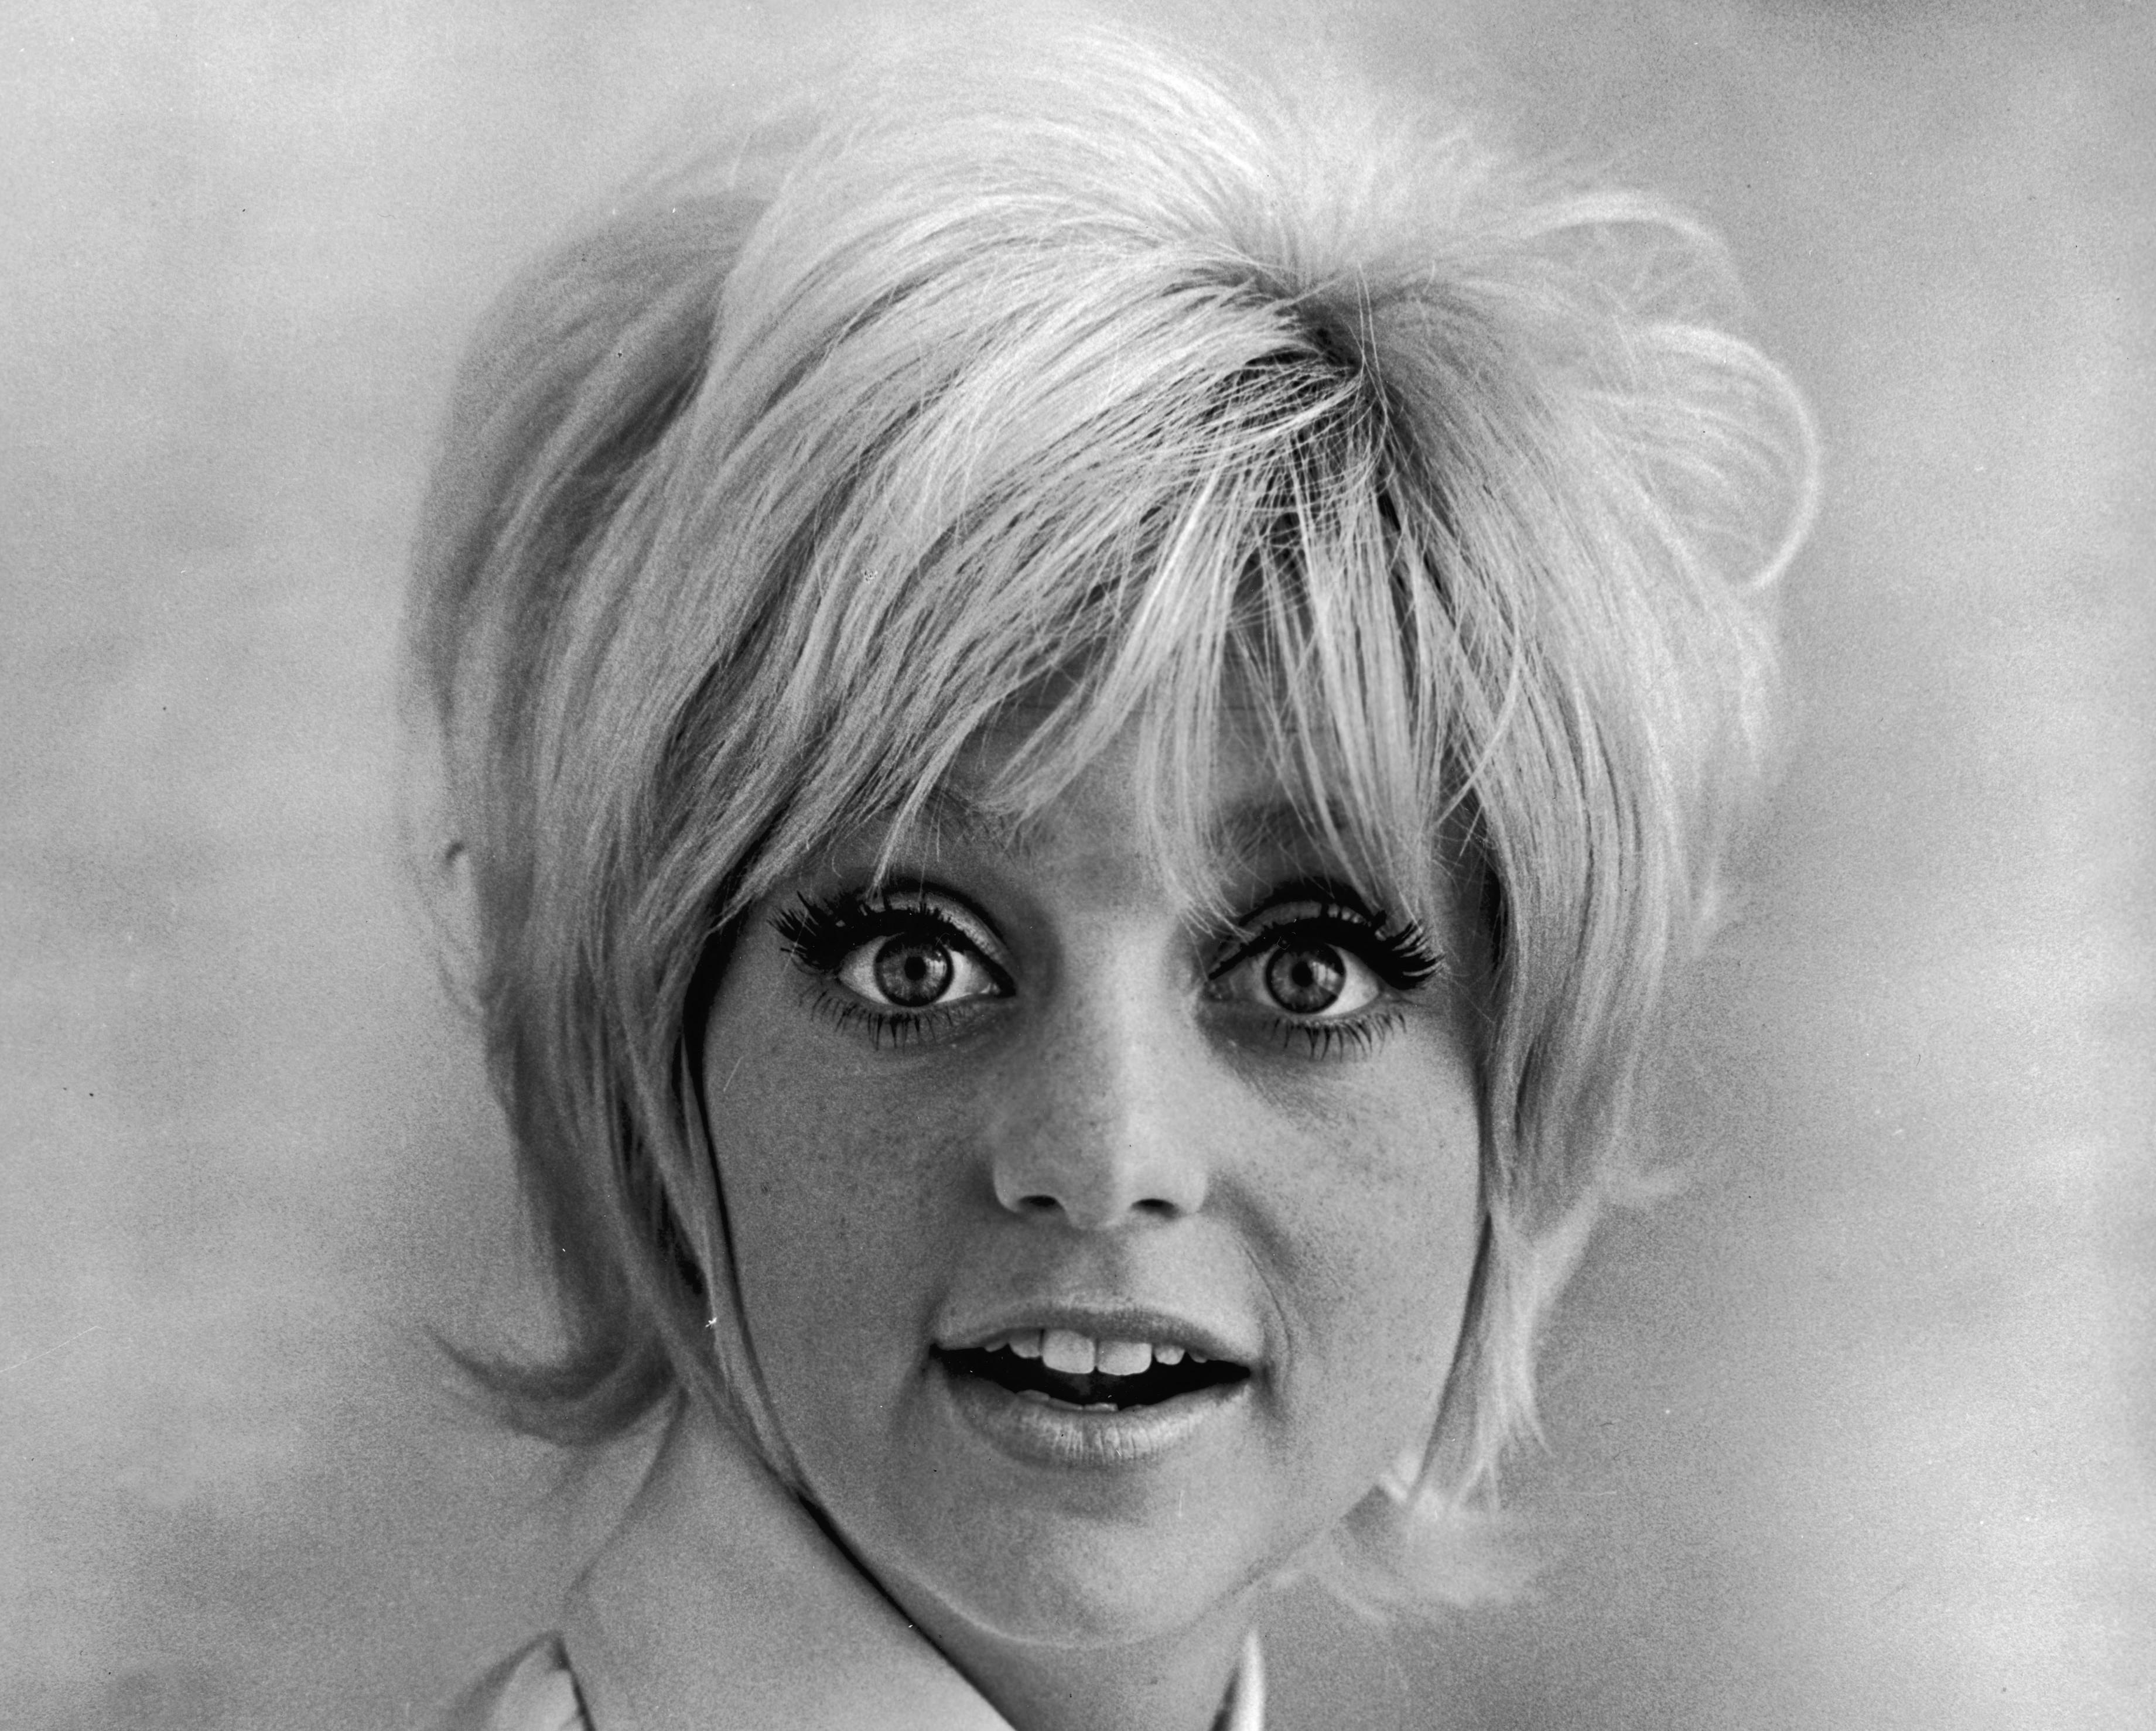 Promorional studio headshot portrait of American actor Goldie Hawn wearing a wide collared shirt for the film, 'Cactus Flower,' directed by Gene Saks, 1969. (Photo by Columbia Pictures/Authenticated News/Courtesy of Getty Images)